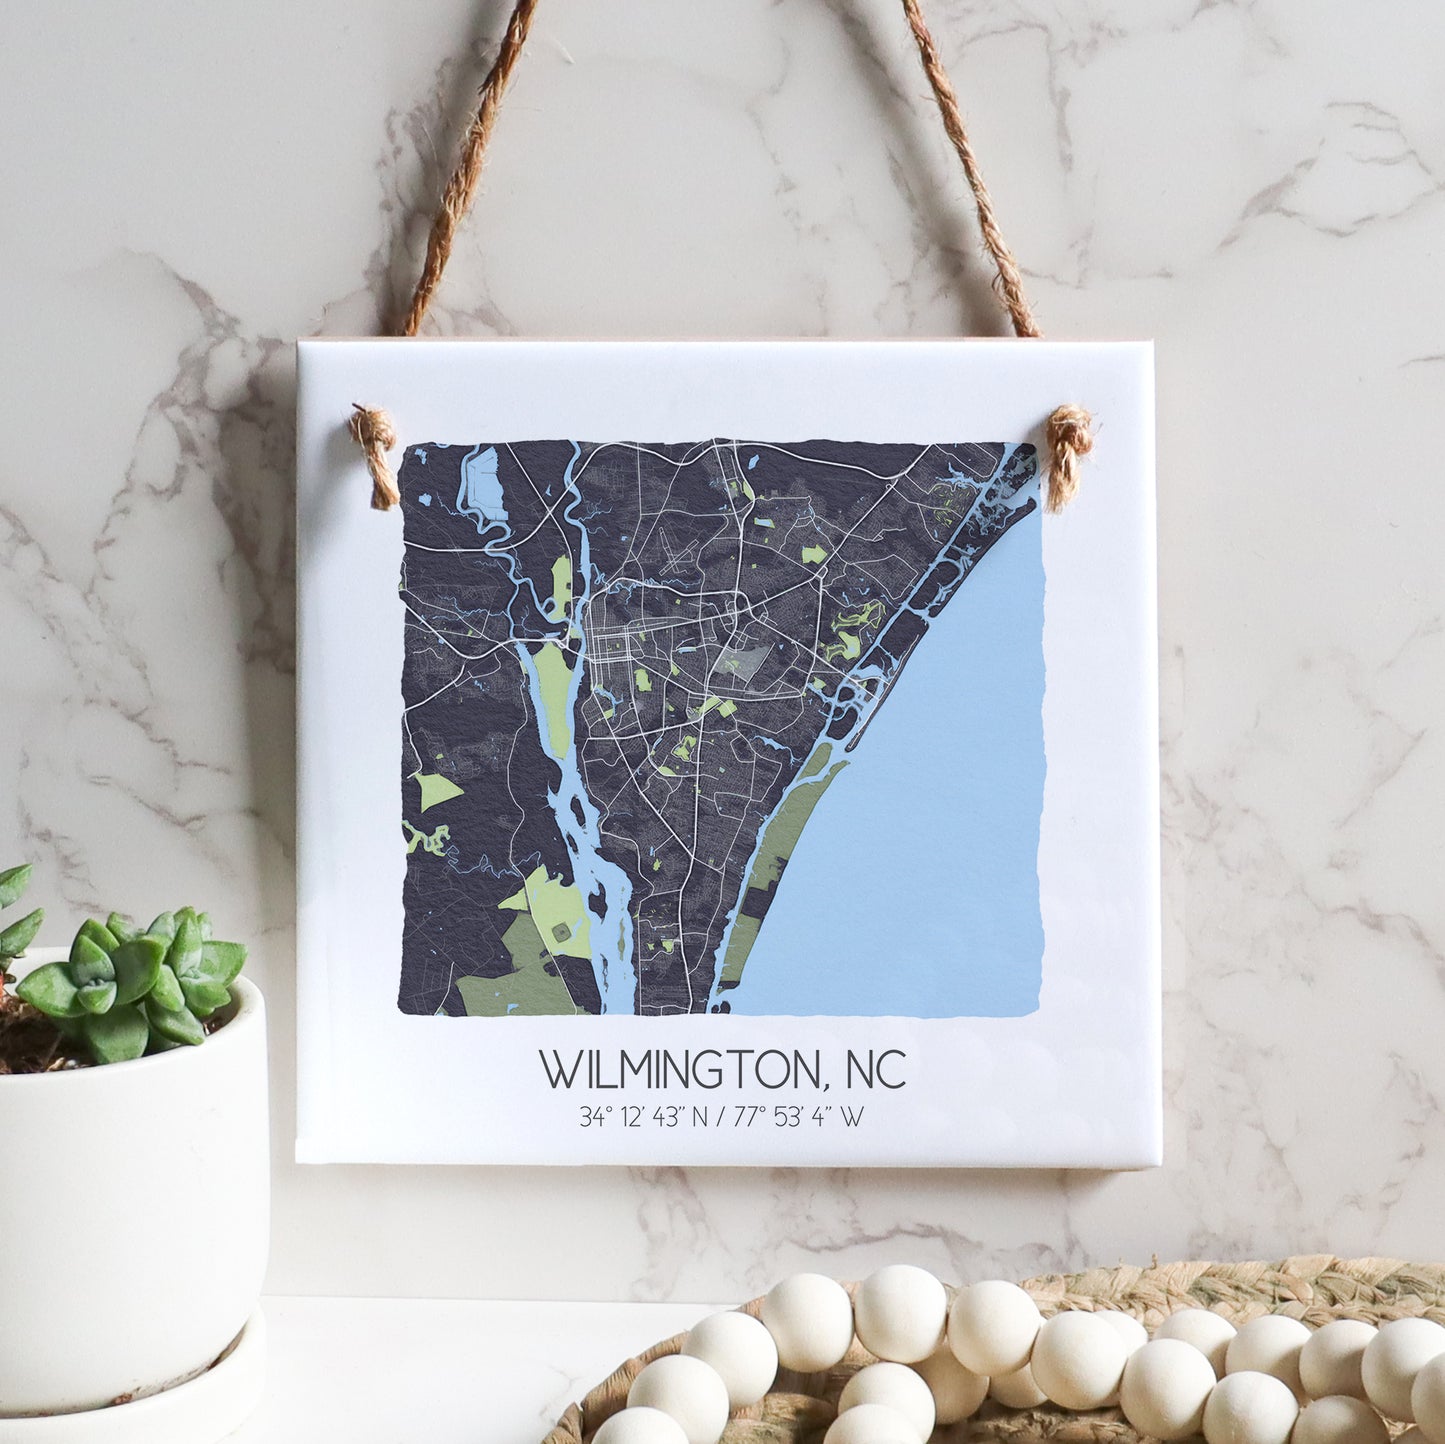 A city map of Wilmington North Carolina on a square ceramic tile sign hanging on a wall, in the color gray